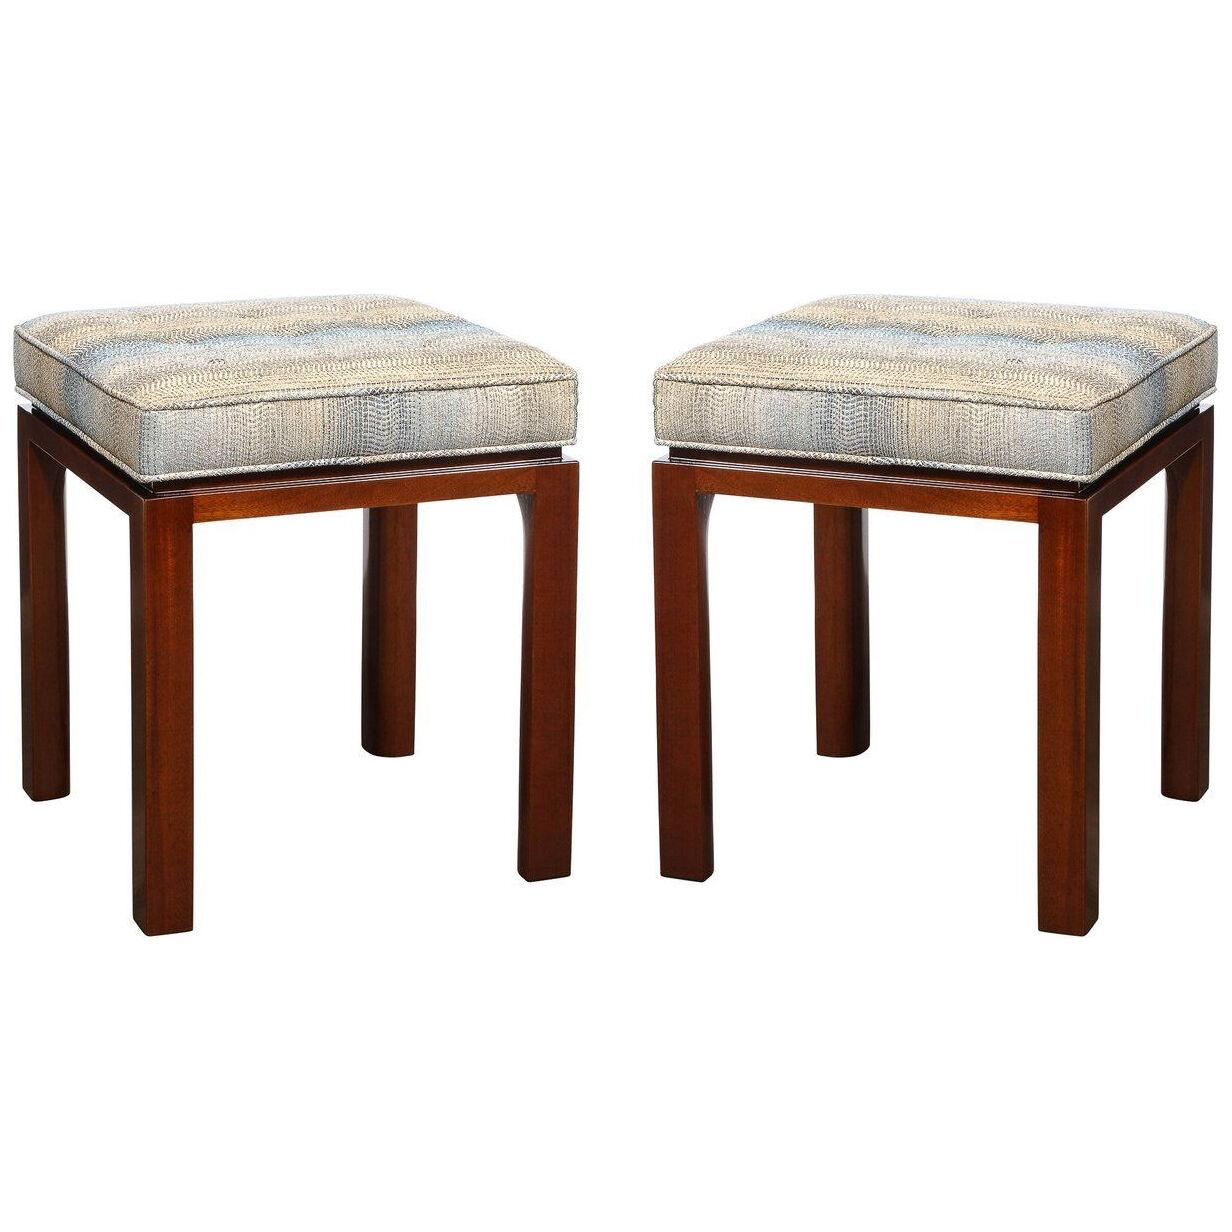 Pair of Mid-Century Modernist Stools with Button Detailing by Harvey Probber